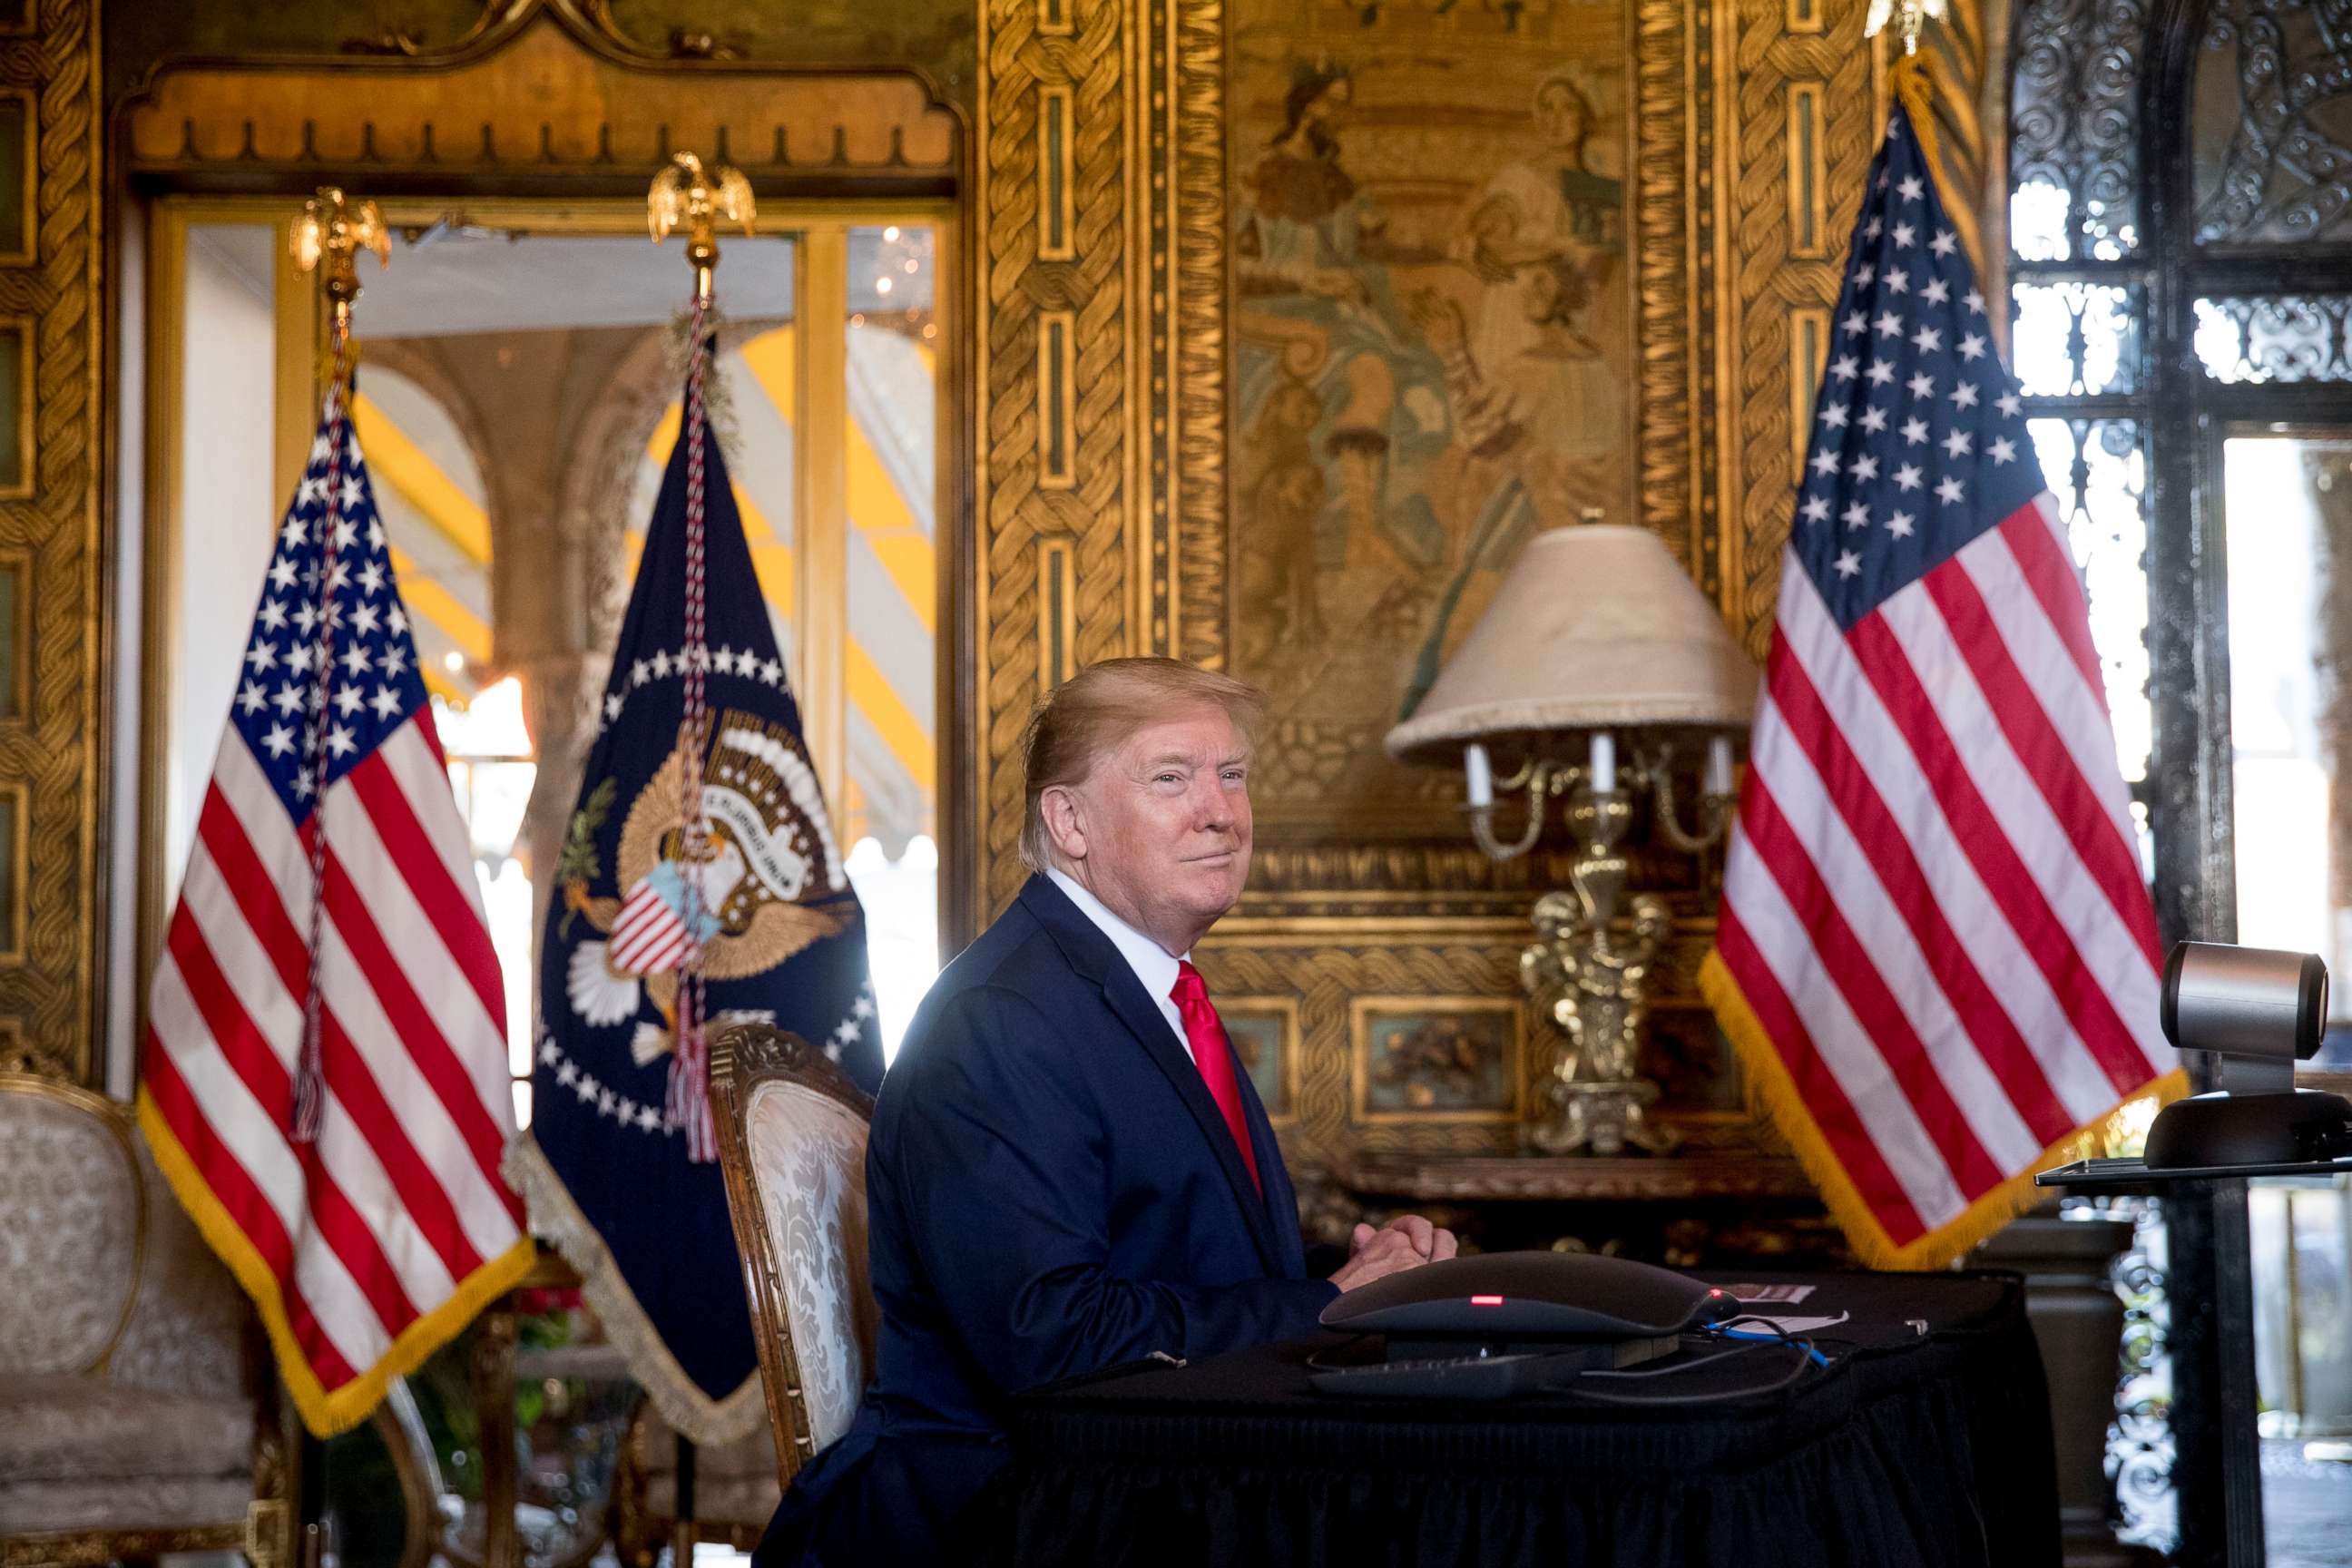 PHOTO: President Donald Trump looks towards members of the media as he speaks during a Christmas Eve video teleconference with members of the military at his Mar-a-Lago estate in Palm Beach, Fla., Dec. 24, 2019.